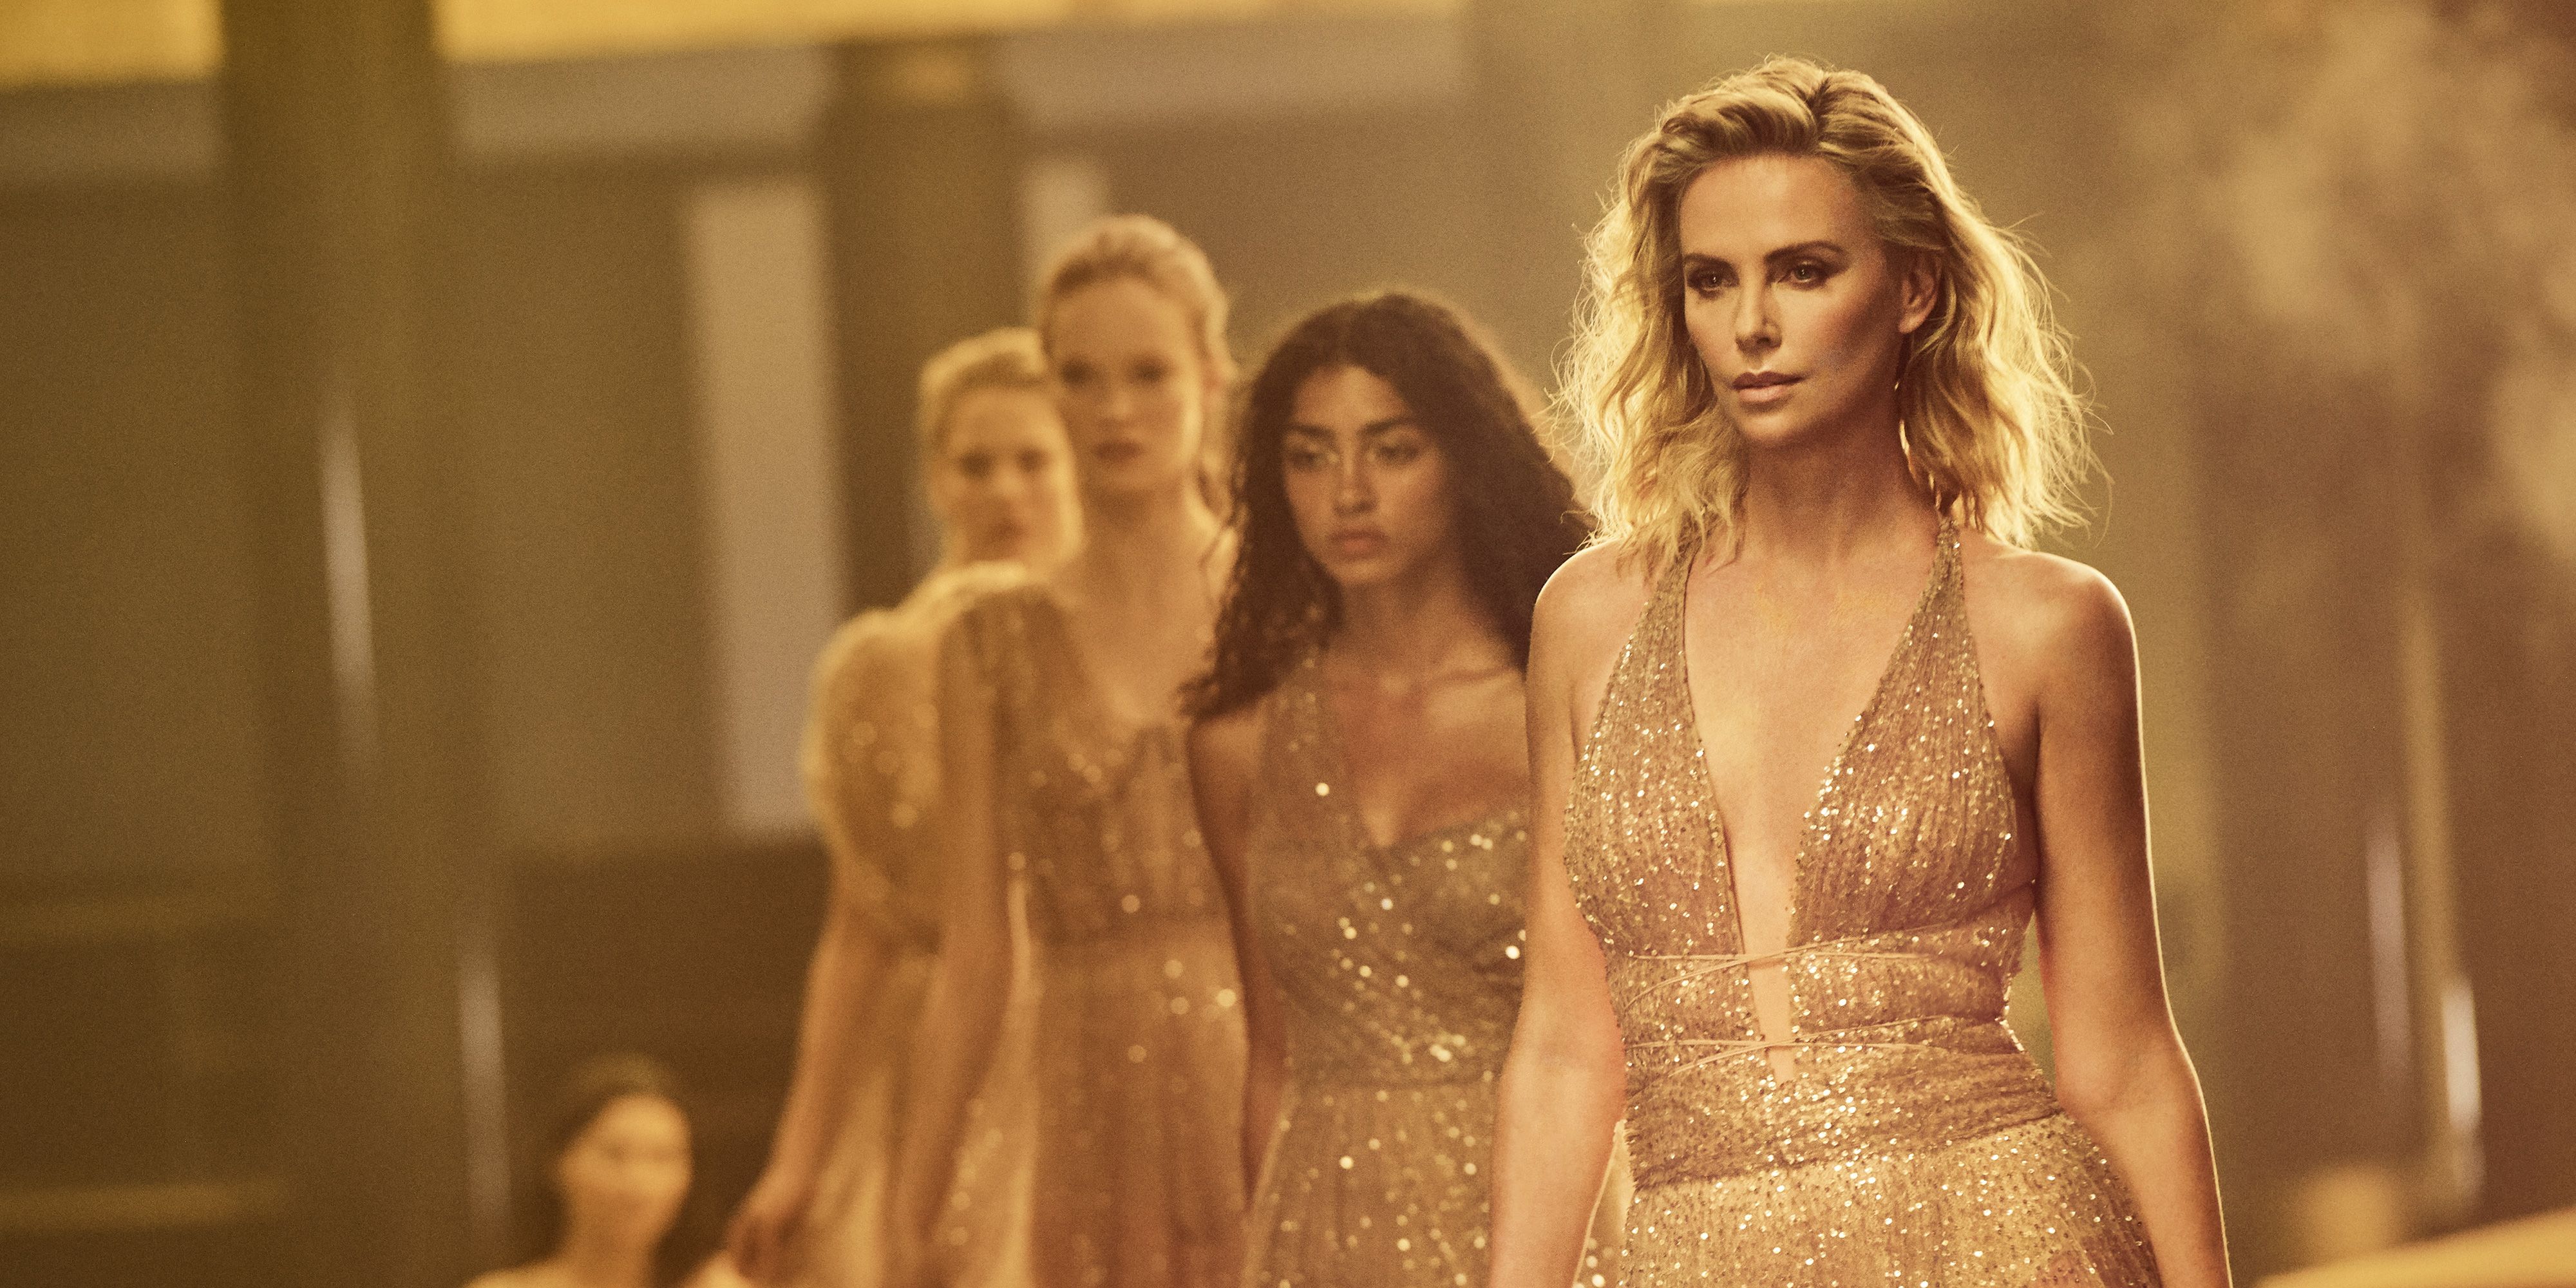 Charlize Theron, a triumphant muse in the new campaign for J'adore Absolu  by Parfums Christian Dior